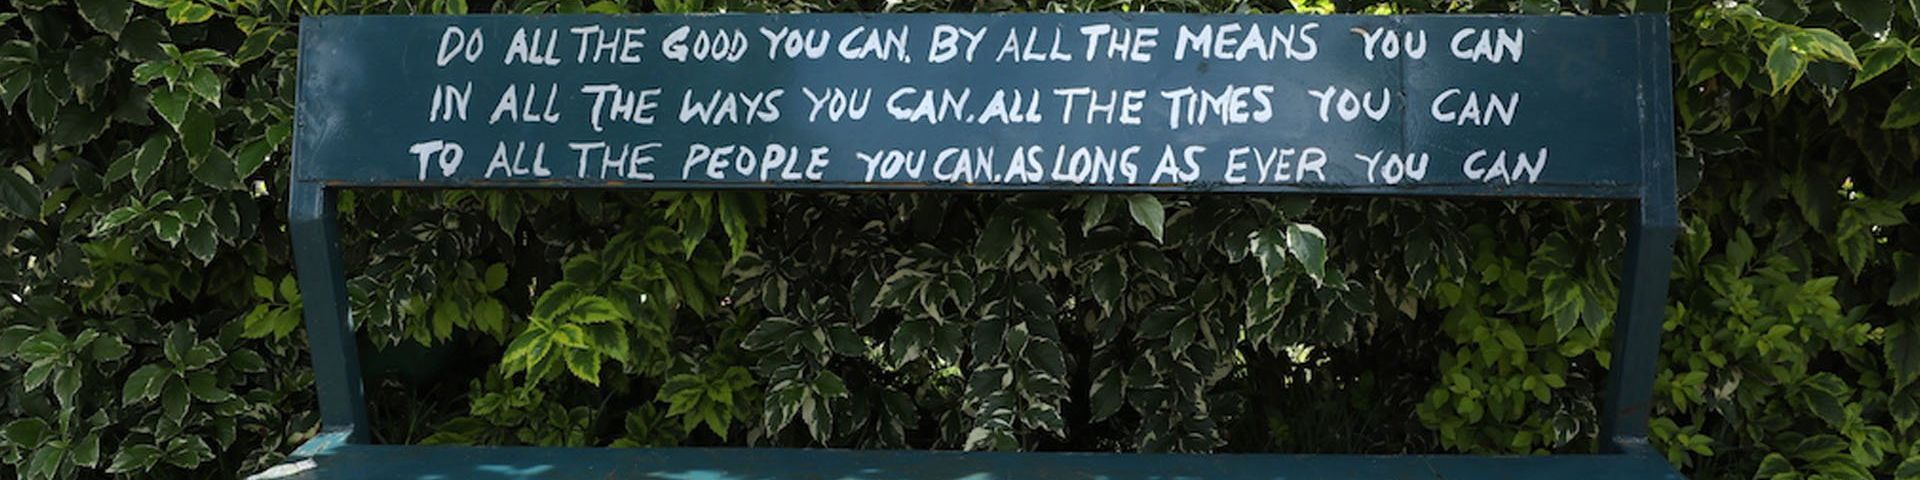 A green bench against a background of leaves. On the bench is hand painted in white letters: “Do all the good you can by all the means you can, in all the ways you can, all the times you can, to all the people you can, as long as ever you can.”